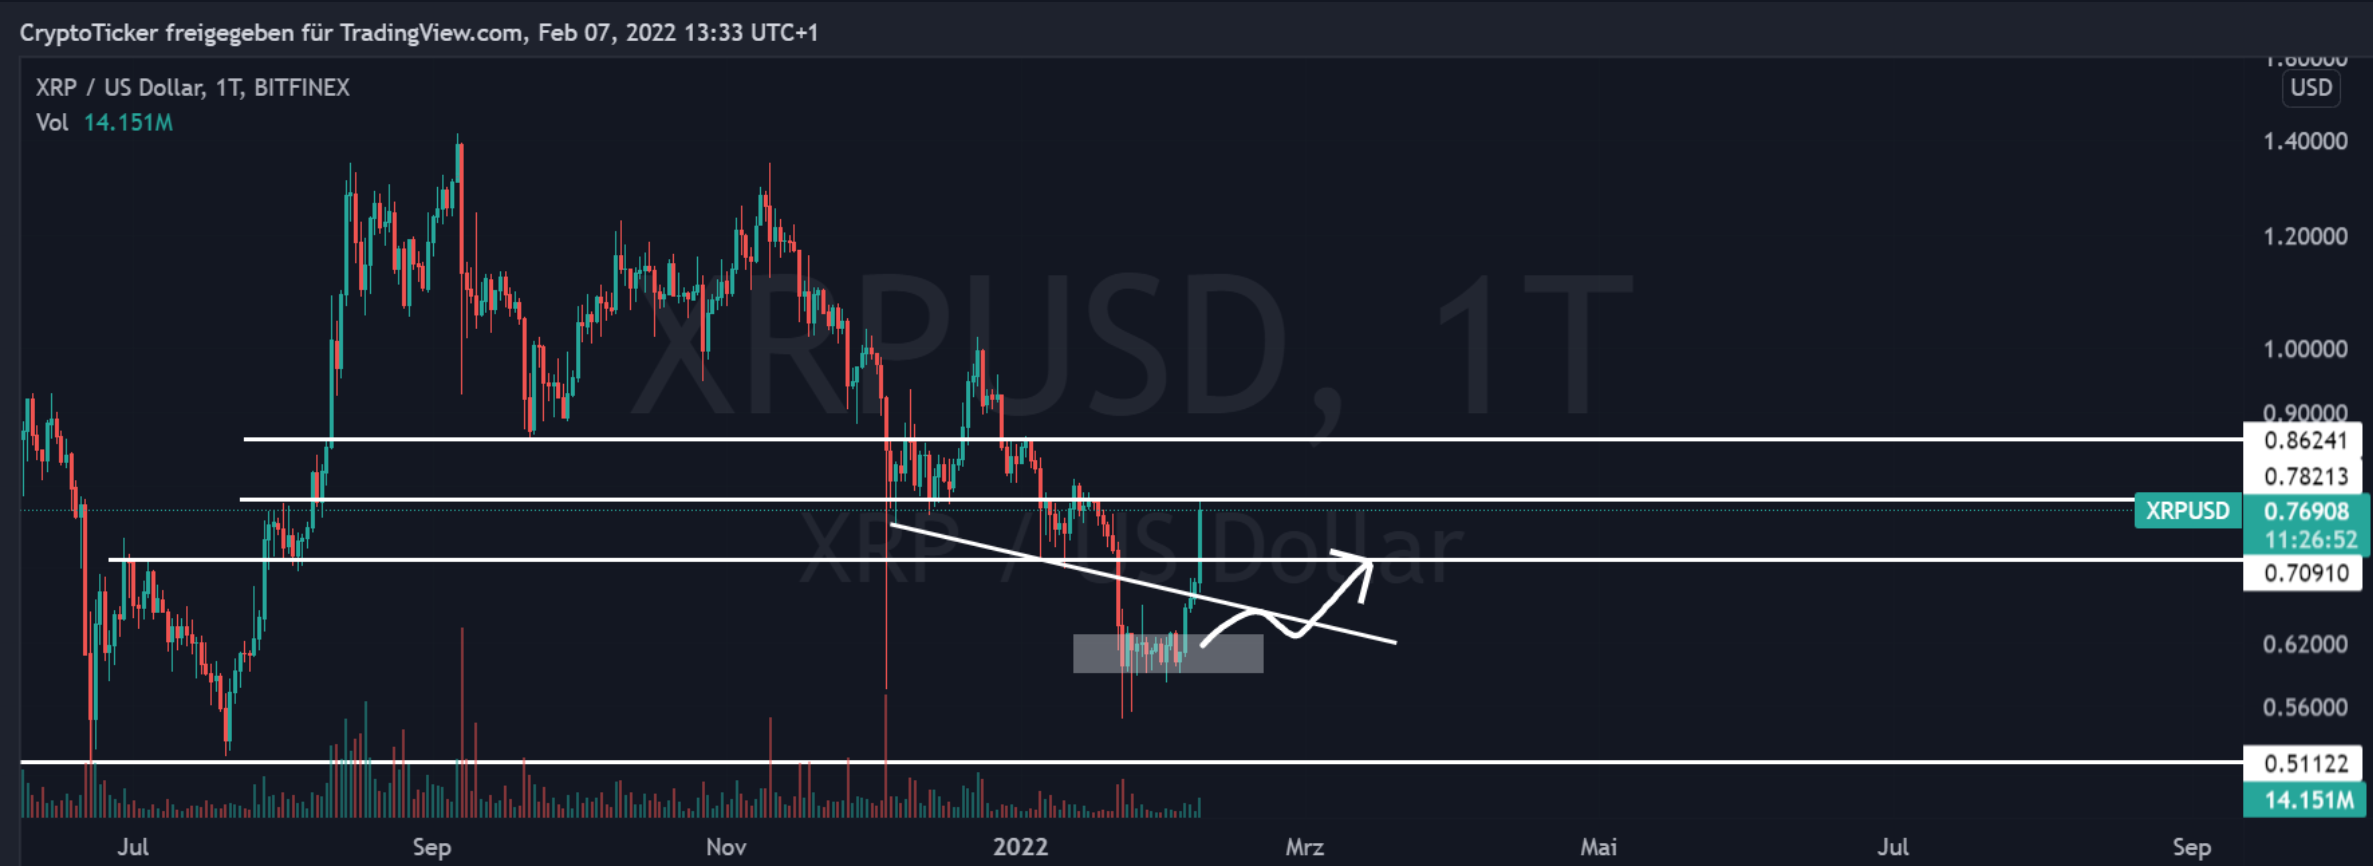 XRP/USD 1-day chart showing the target area of XRP